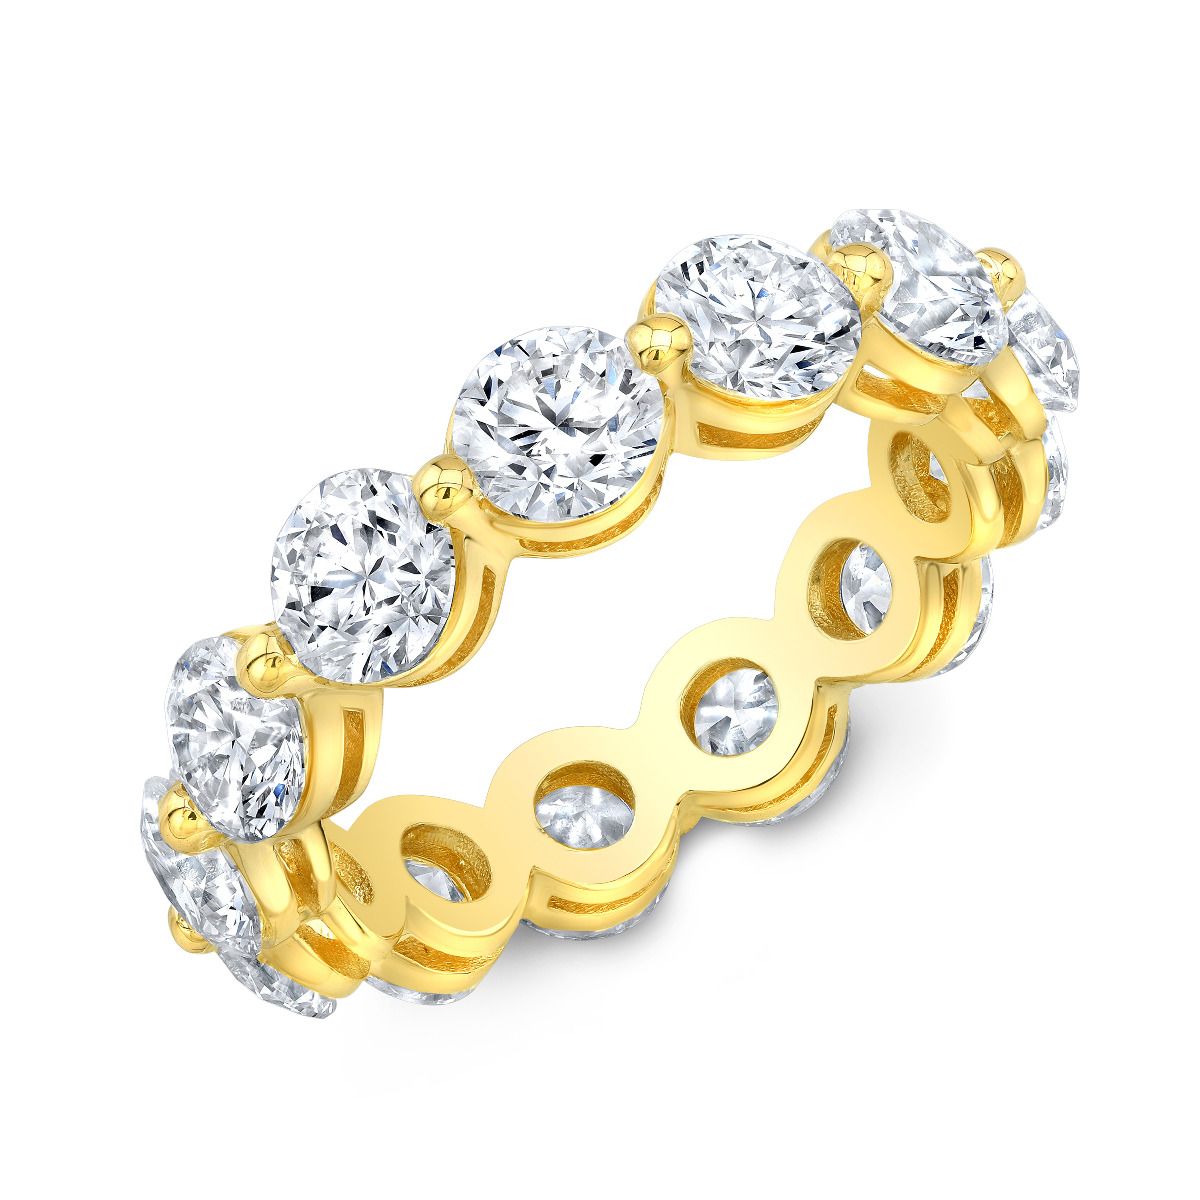 4 Carat Round Single prong Eternity Band in Yellow Gold.